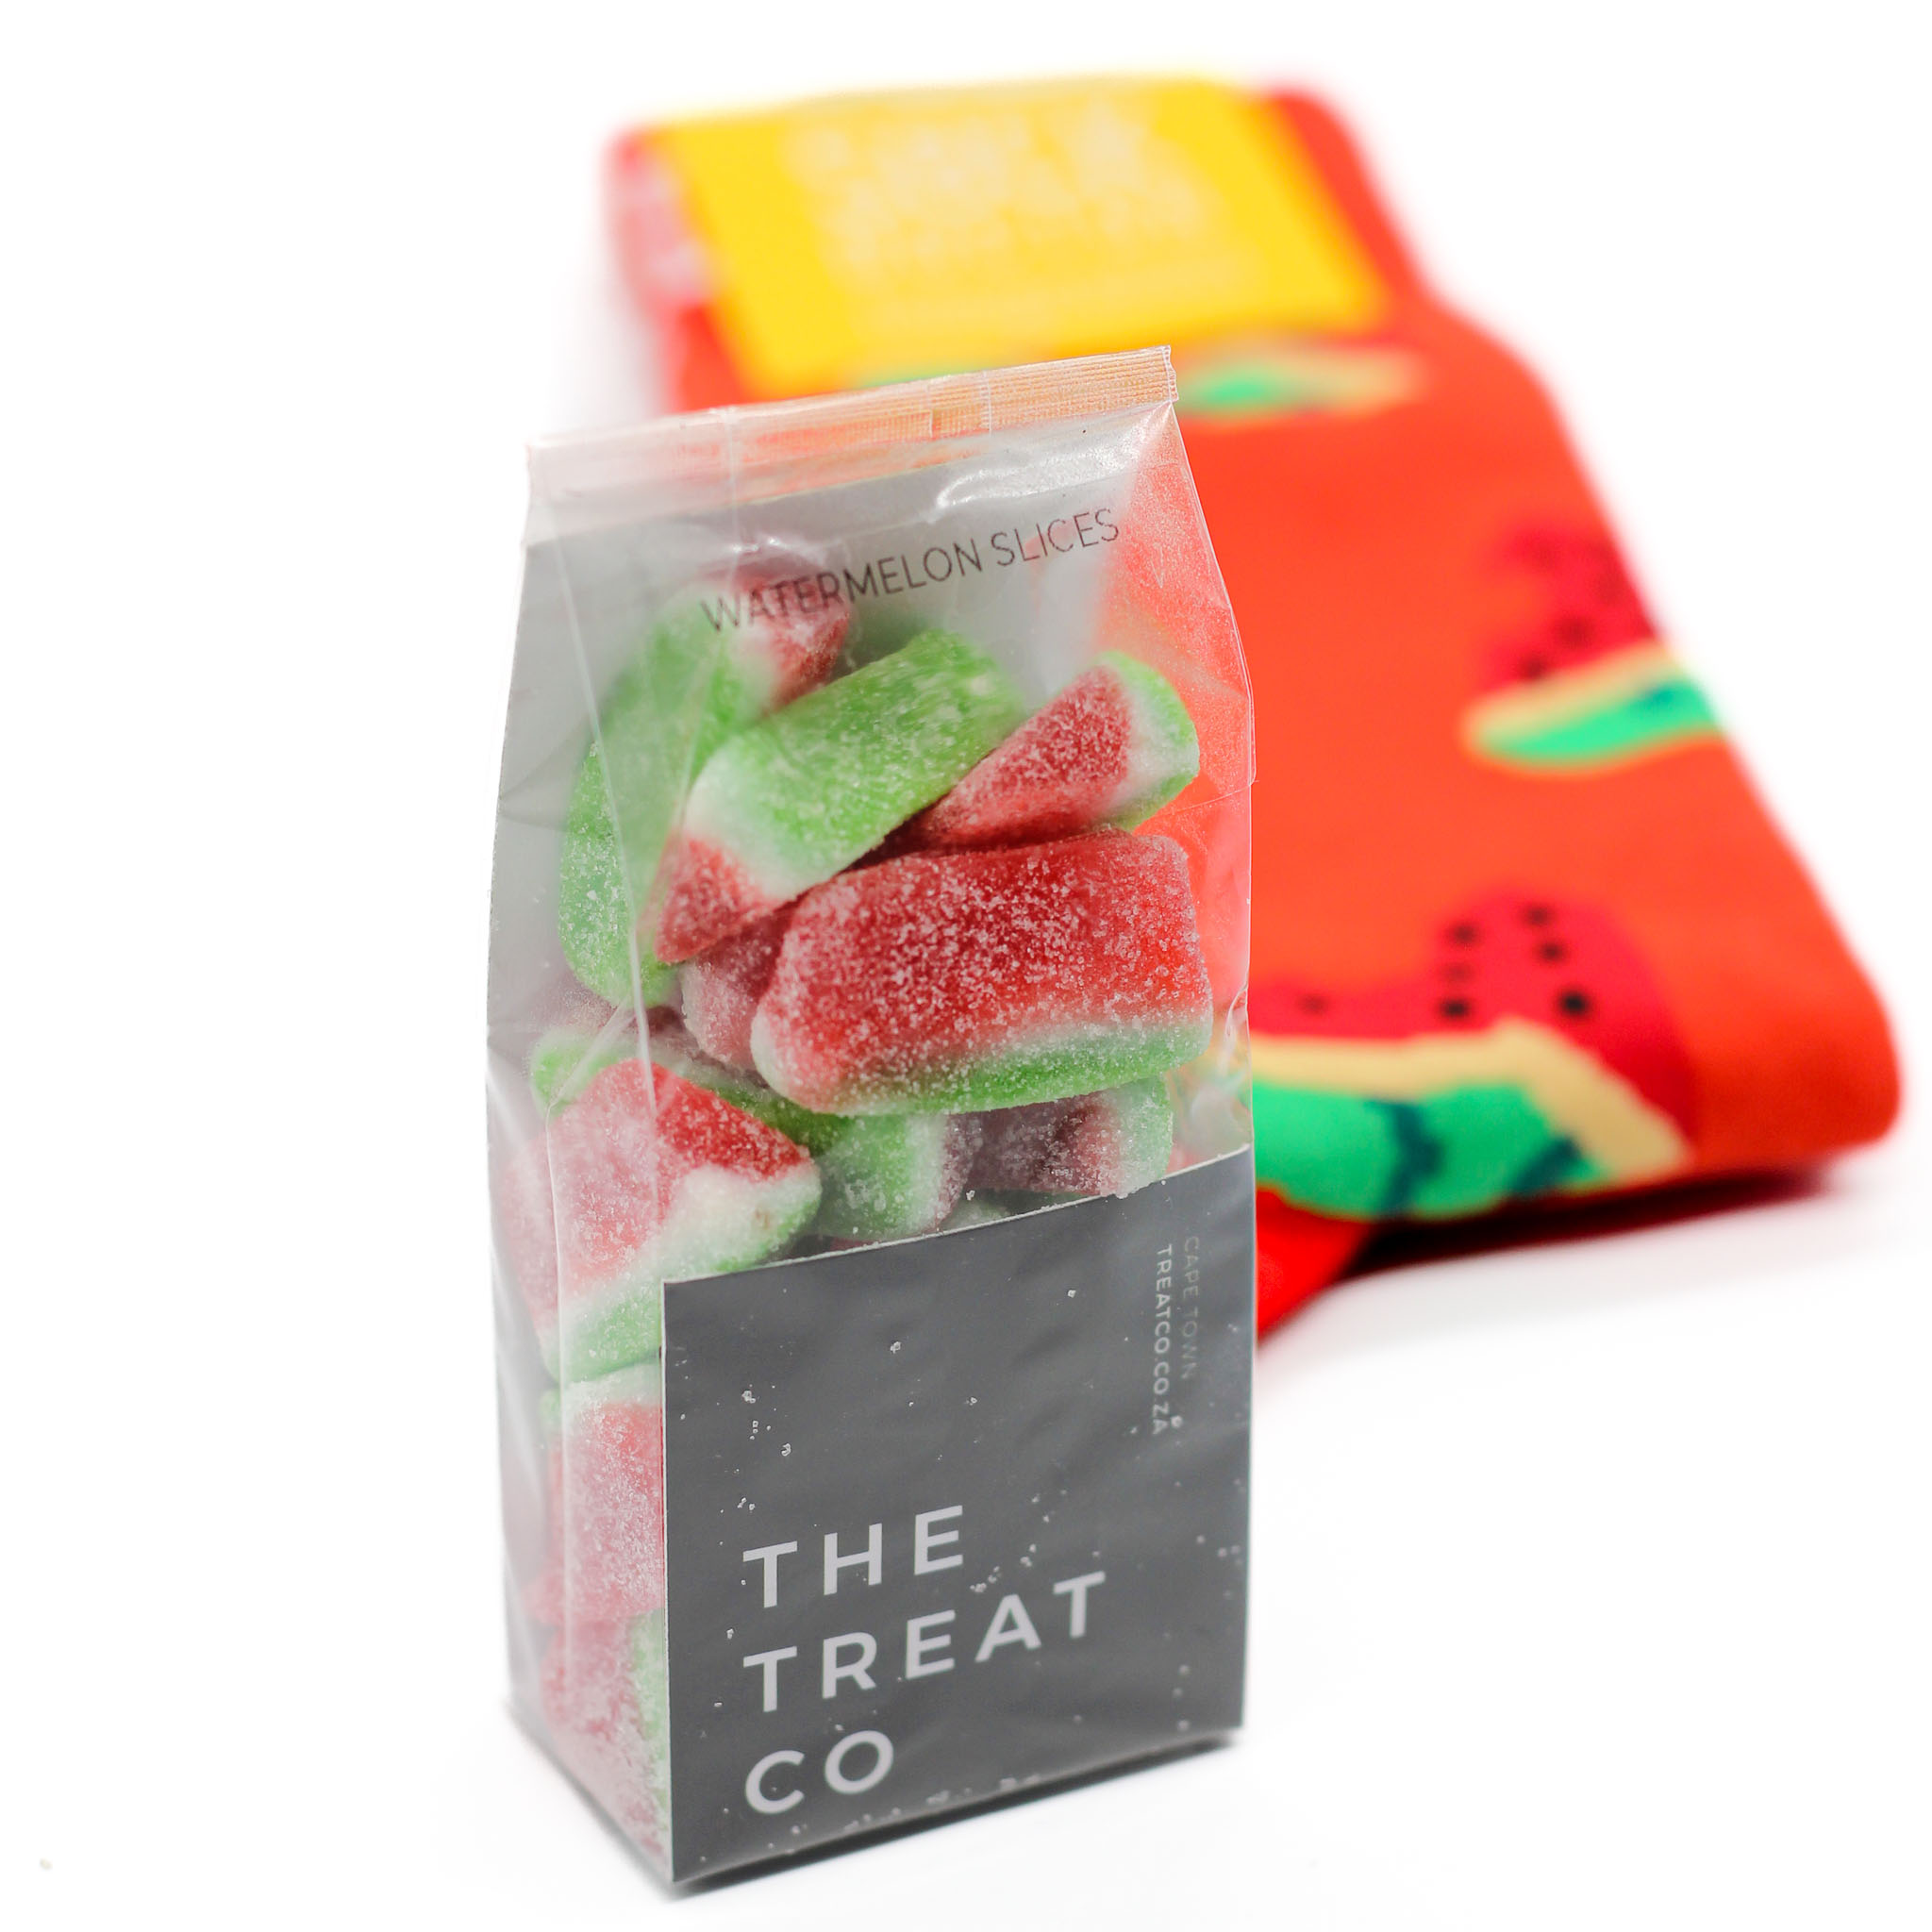 Watermelon slices and socks Treat Co -Ground Culture